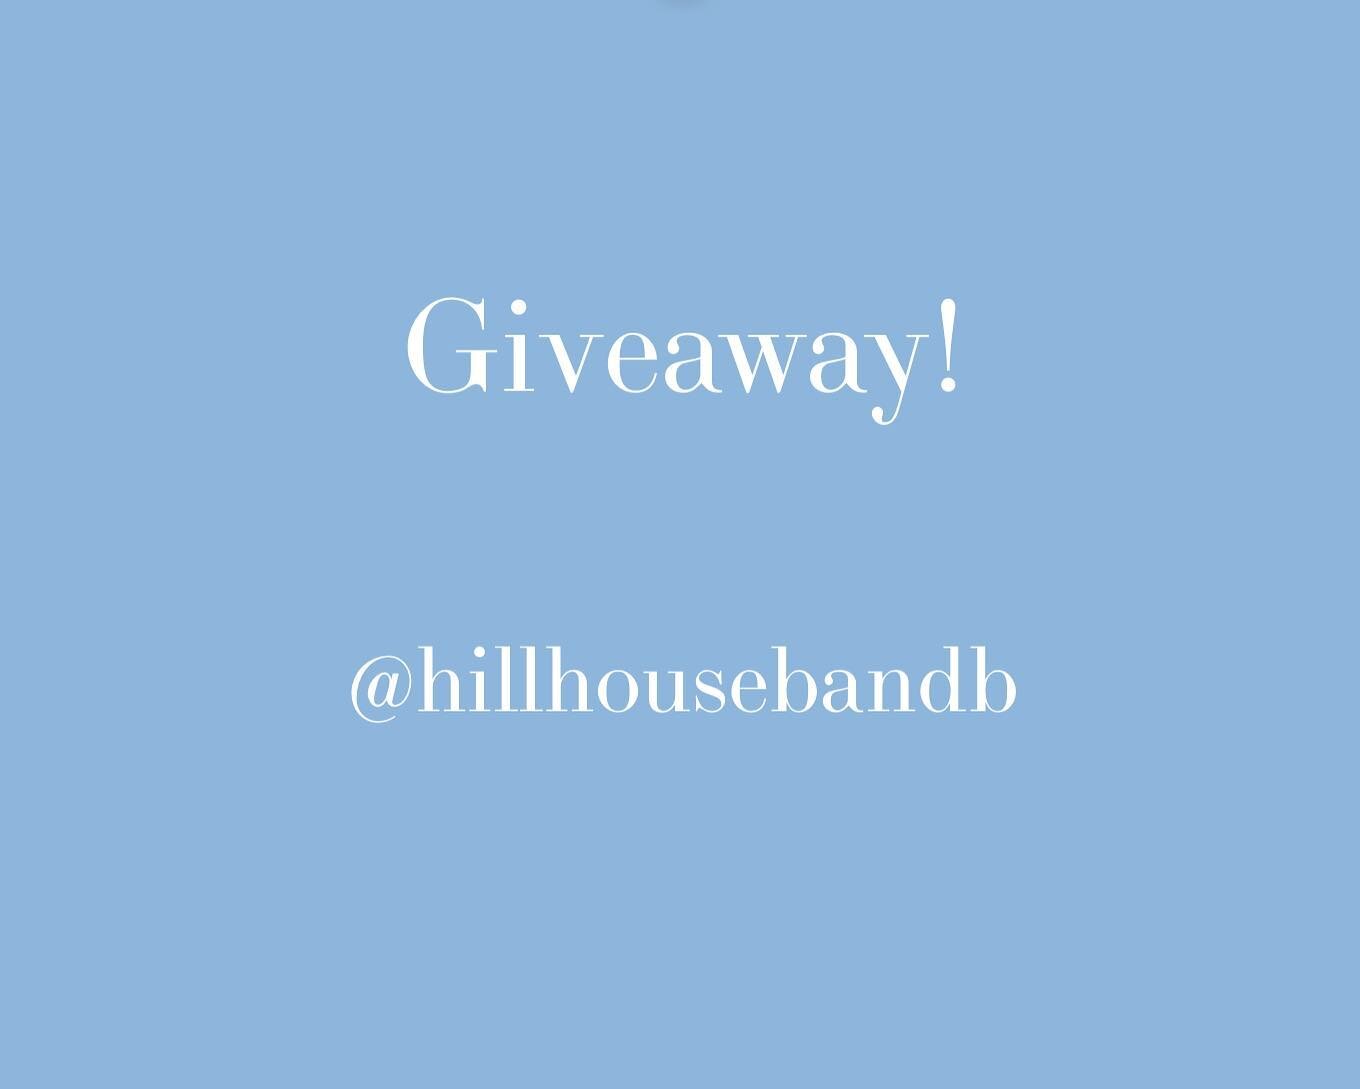 We are excited to be offering a complementary 2 night stay to one of our hardworking NHS heroes! Tag an NHS healthcare worker in the comments below.

To enter you and the recipient need to be following @hillhousebandb The winner will be selected at r